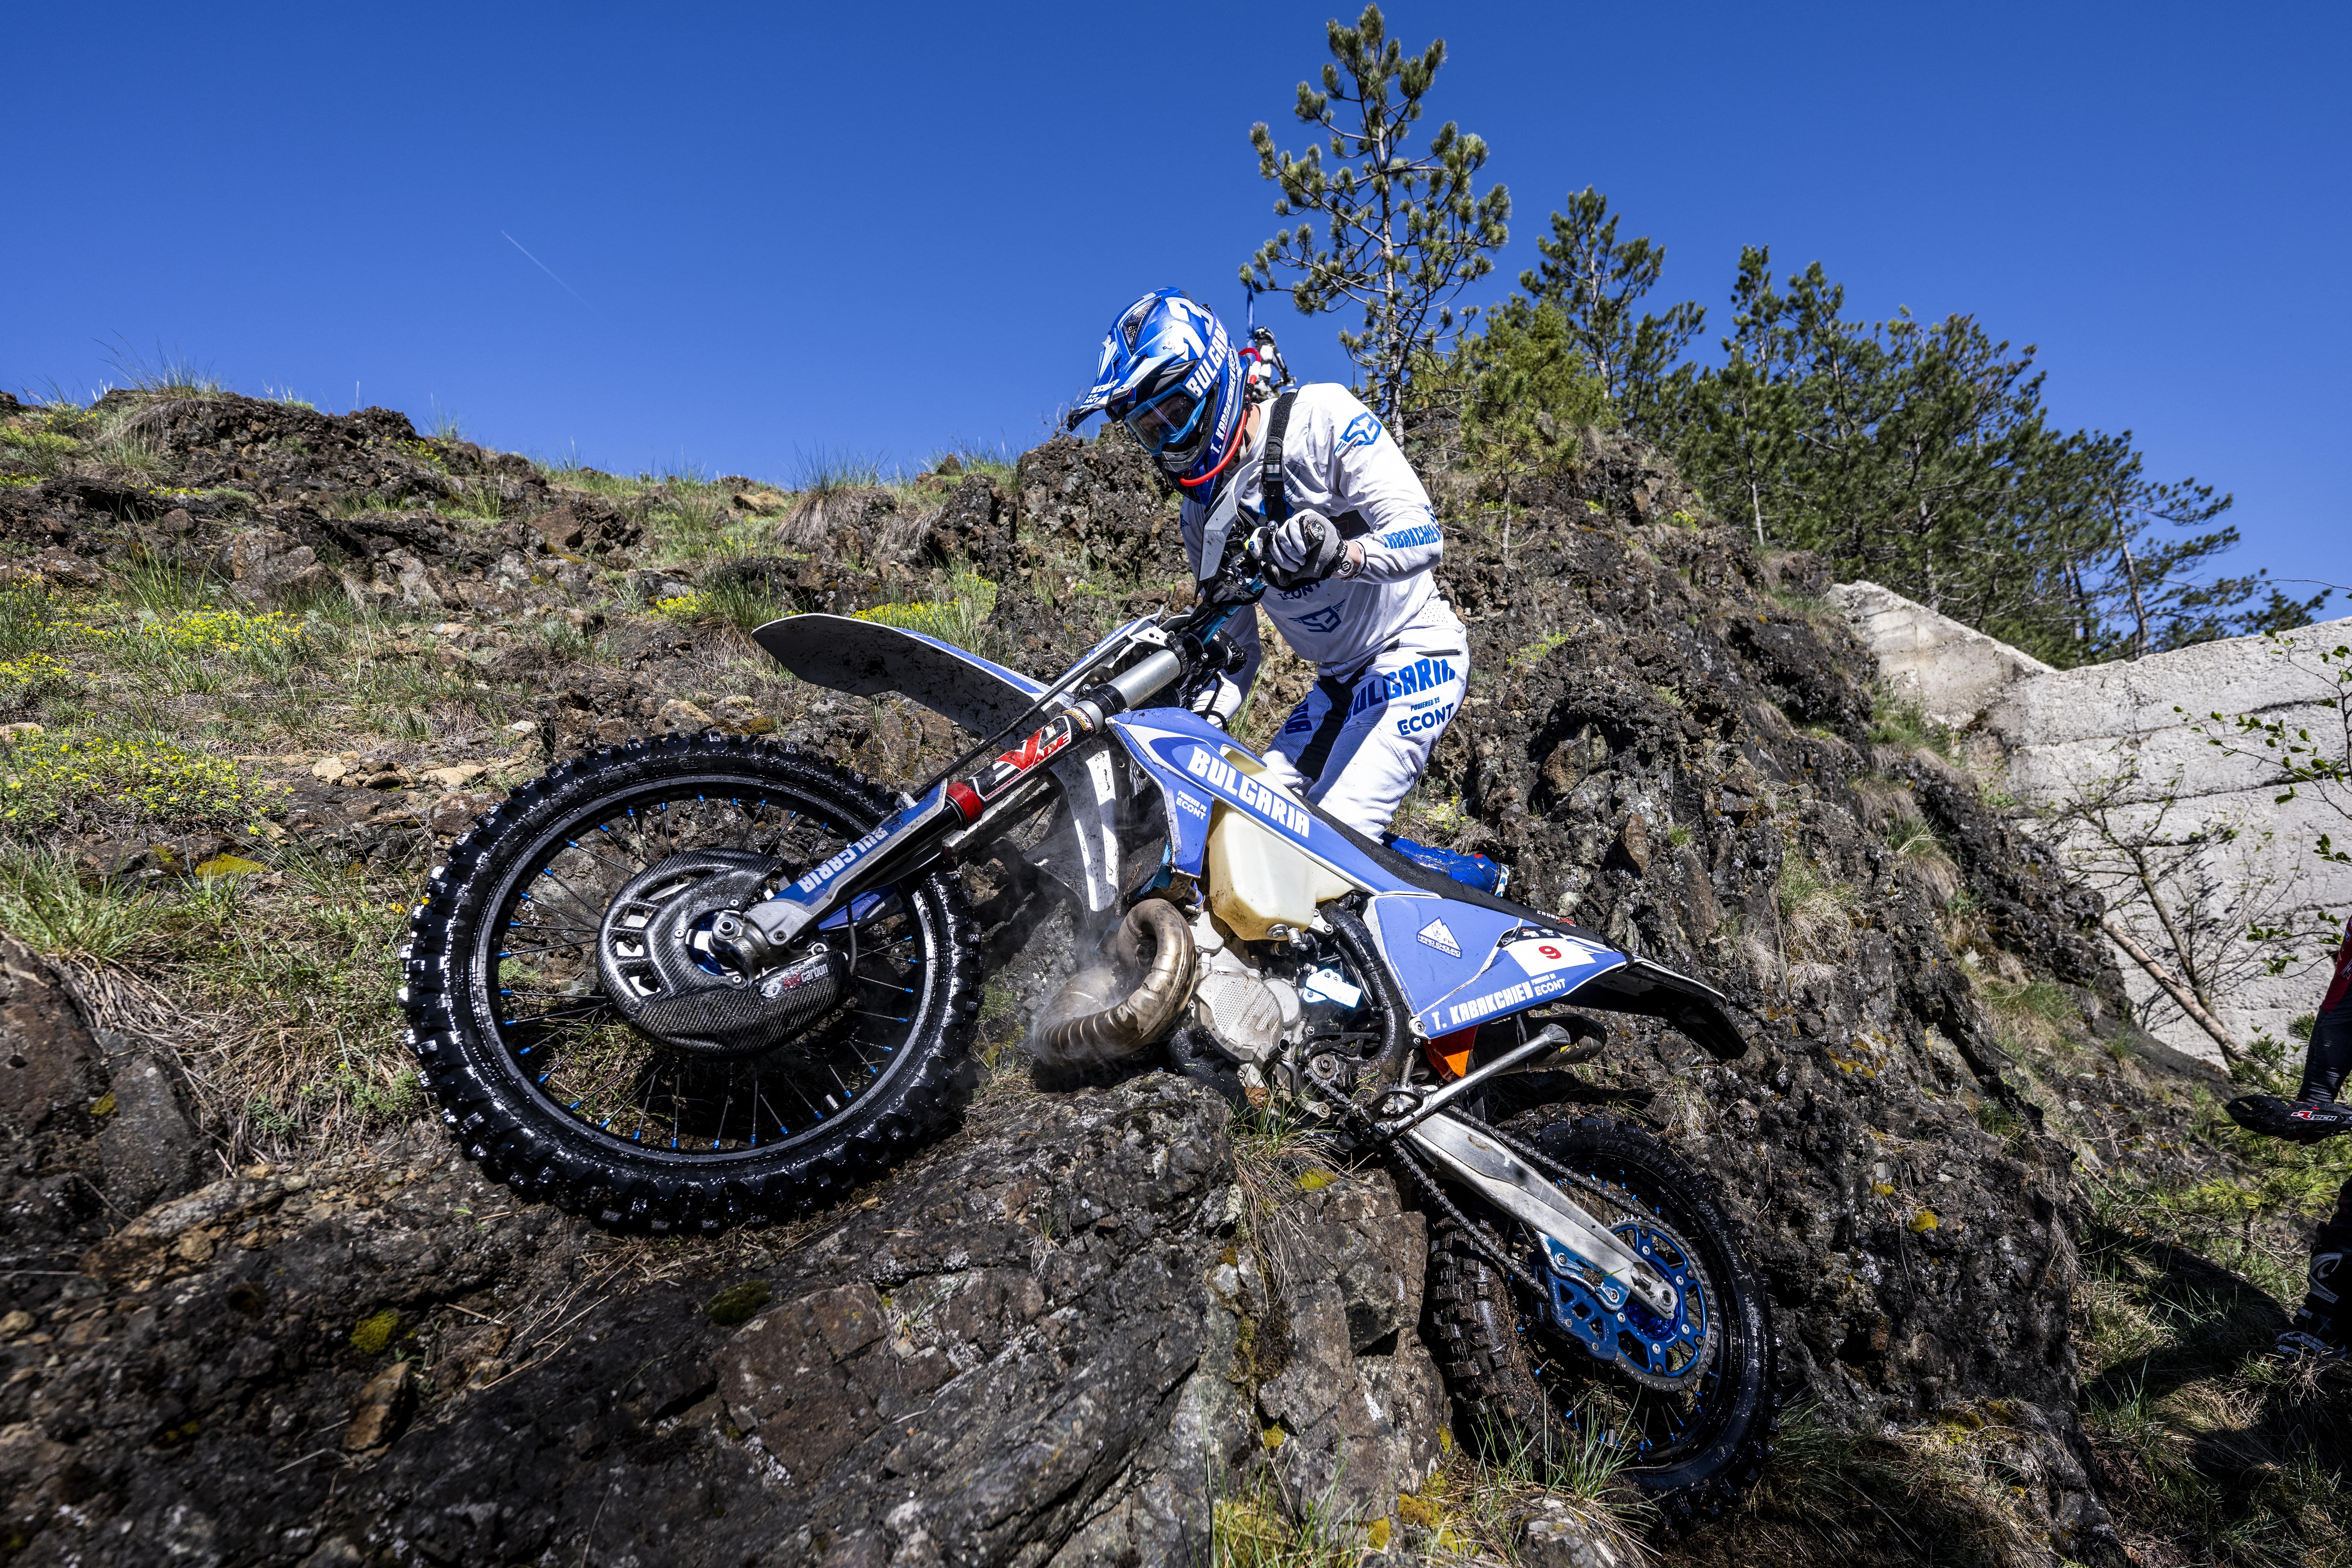 XROSS: TEODOR KABAKCHIEV THE FASTEST RIDER ON THE 1ST OFFROAD DAY